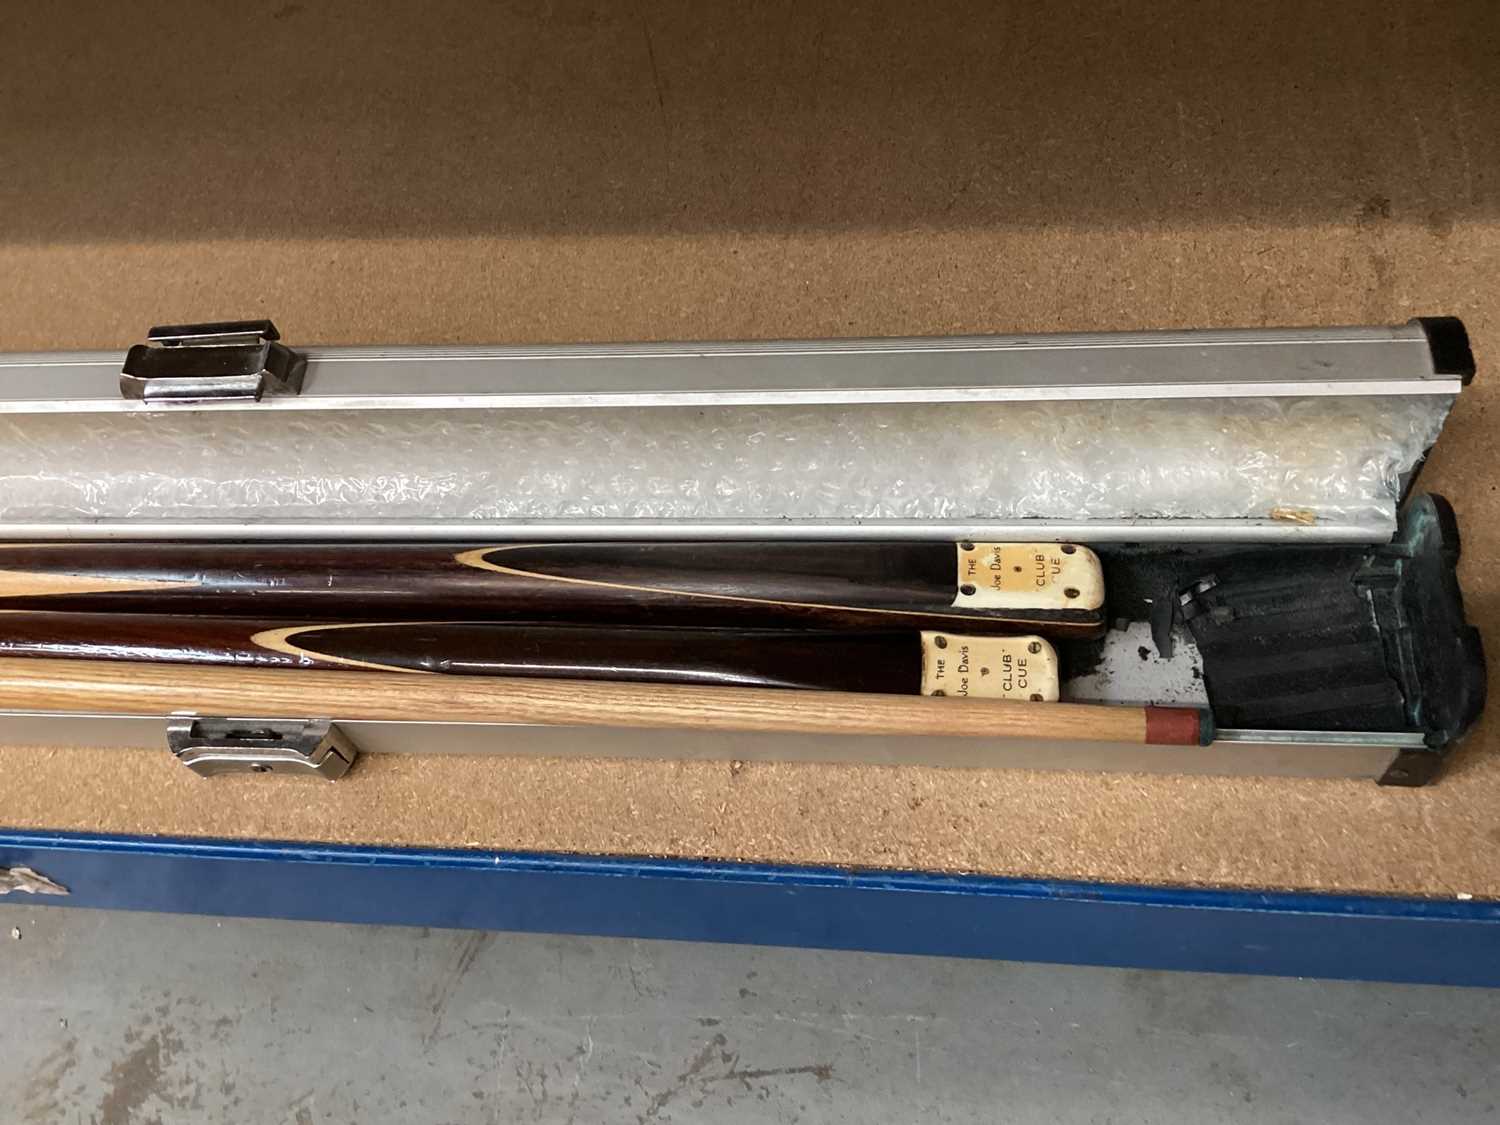 Two Joe Davis 'Club' cues and a Permac Club snooker cue, with case - Image 2 of 7